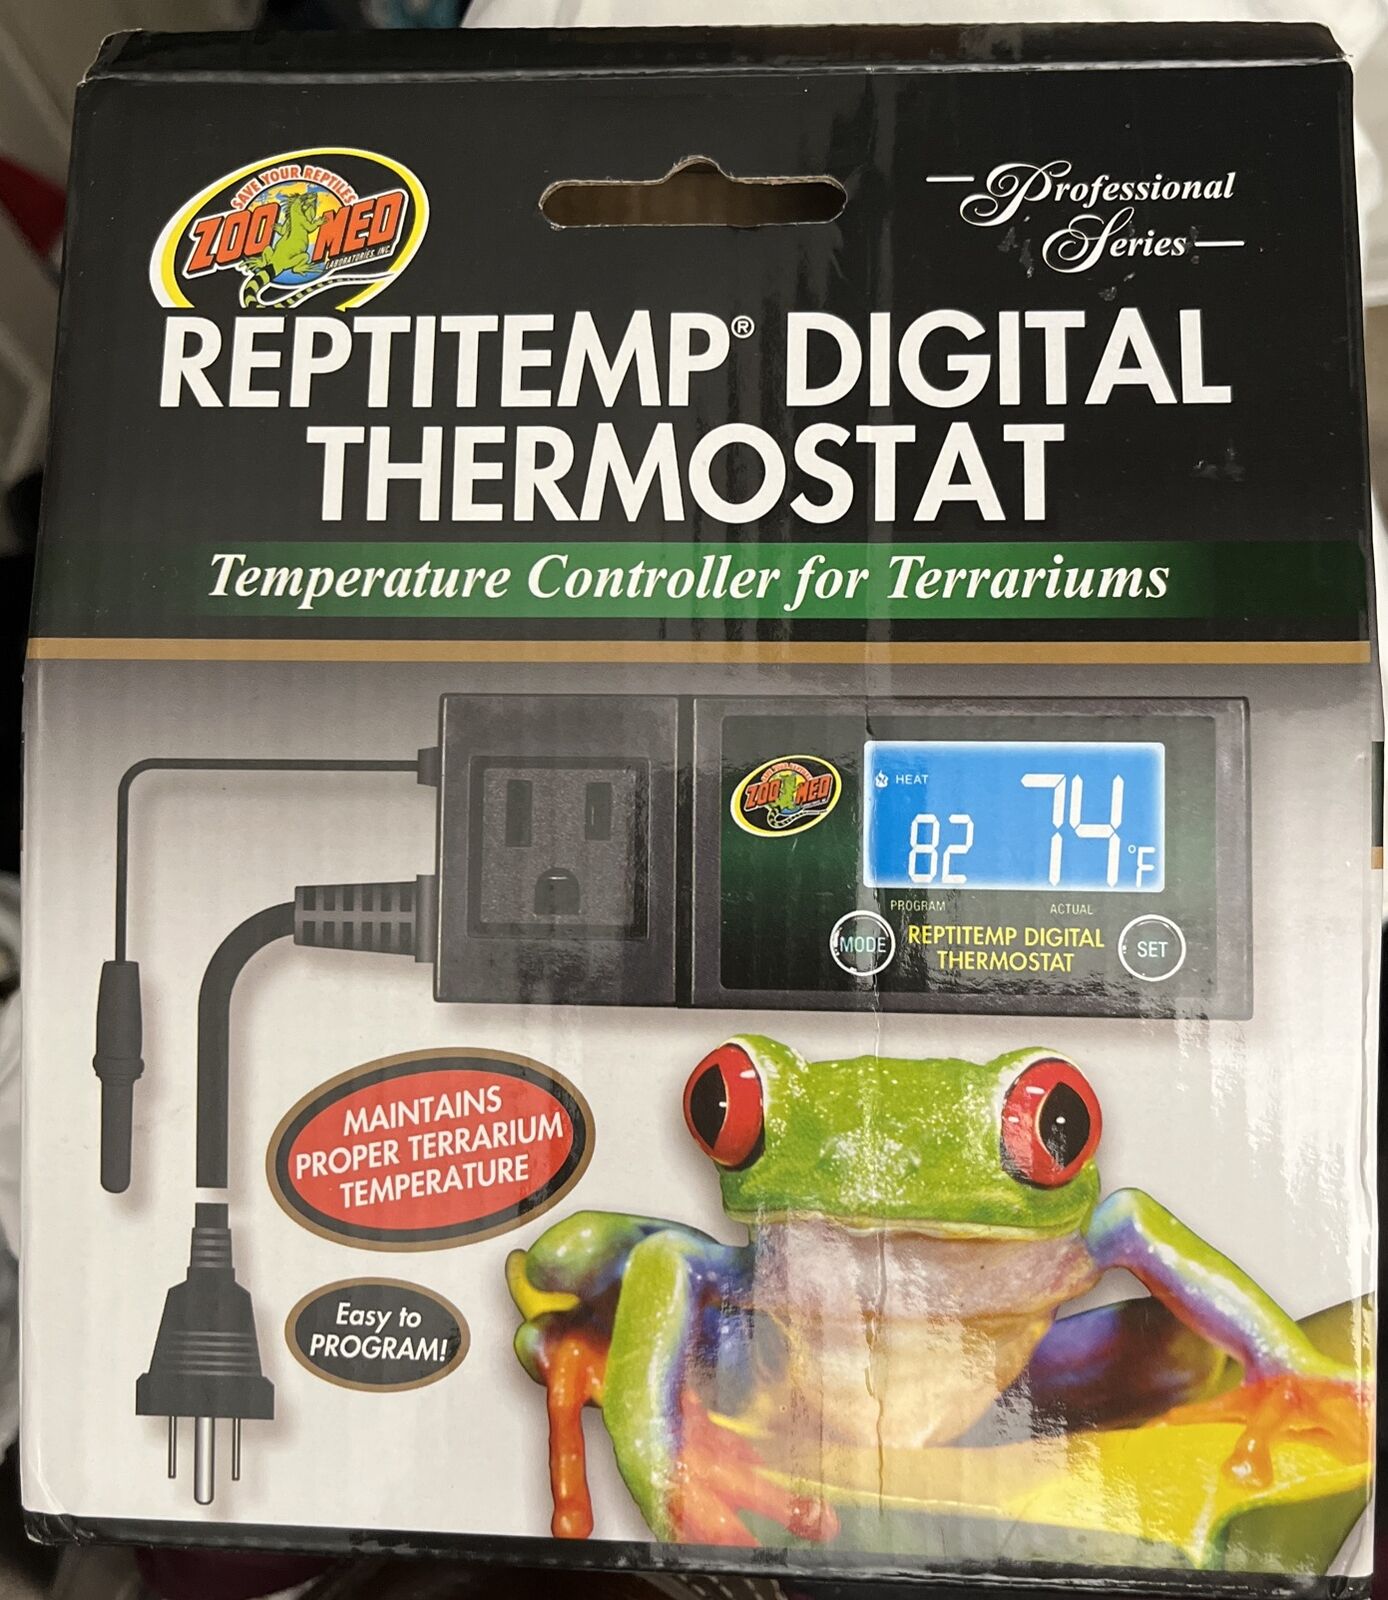 ZOO MED RT-600 REPTITEMP DIGITAL THERMOSTAT LCD DISPLAY Automatic $2 SHIPPING